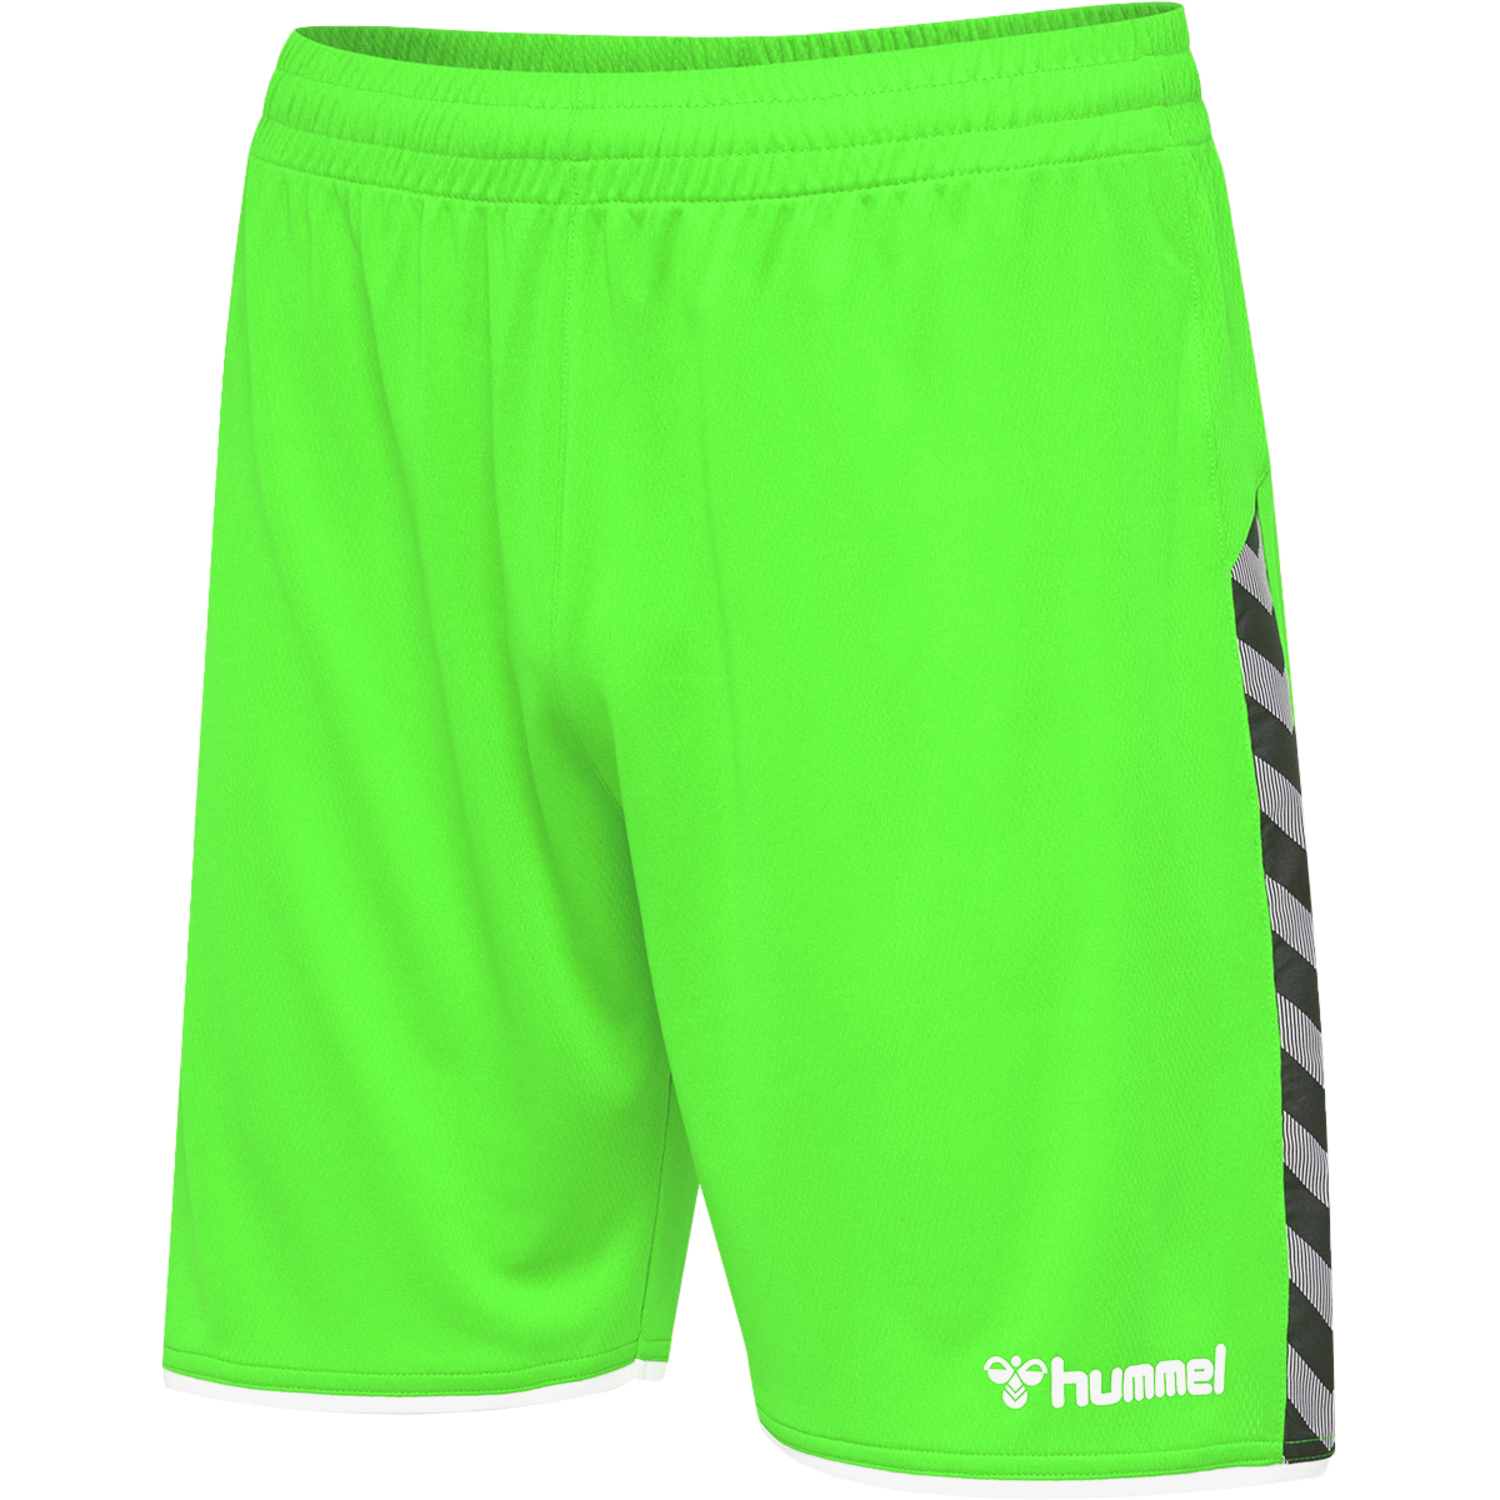 KIDS POLY SHORTS GREEN - GECKO hummel AUTHENTIC